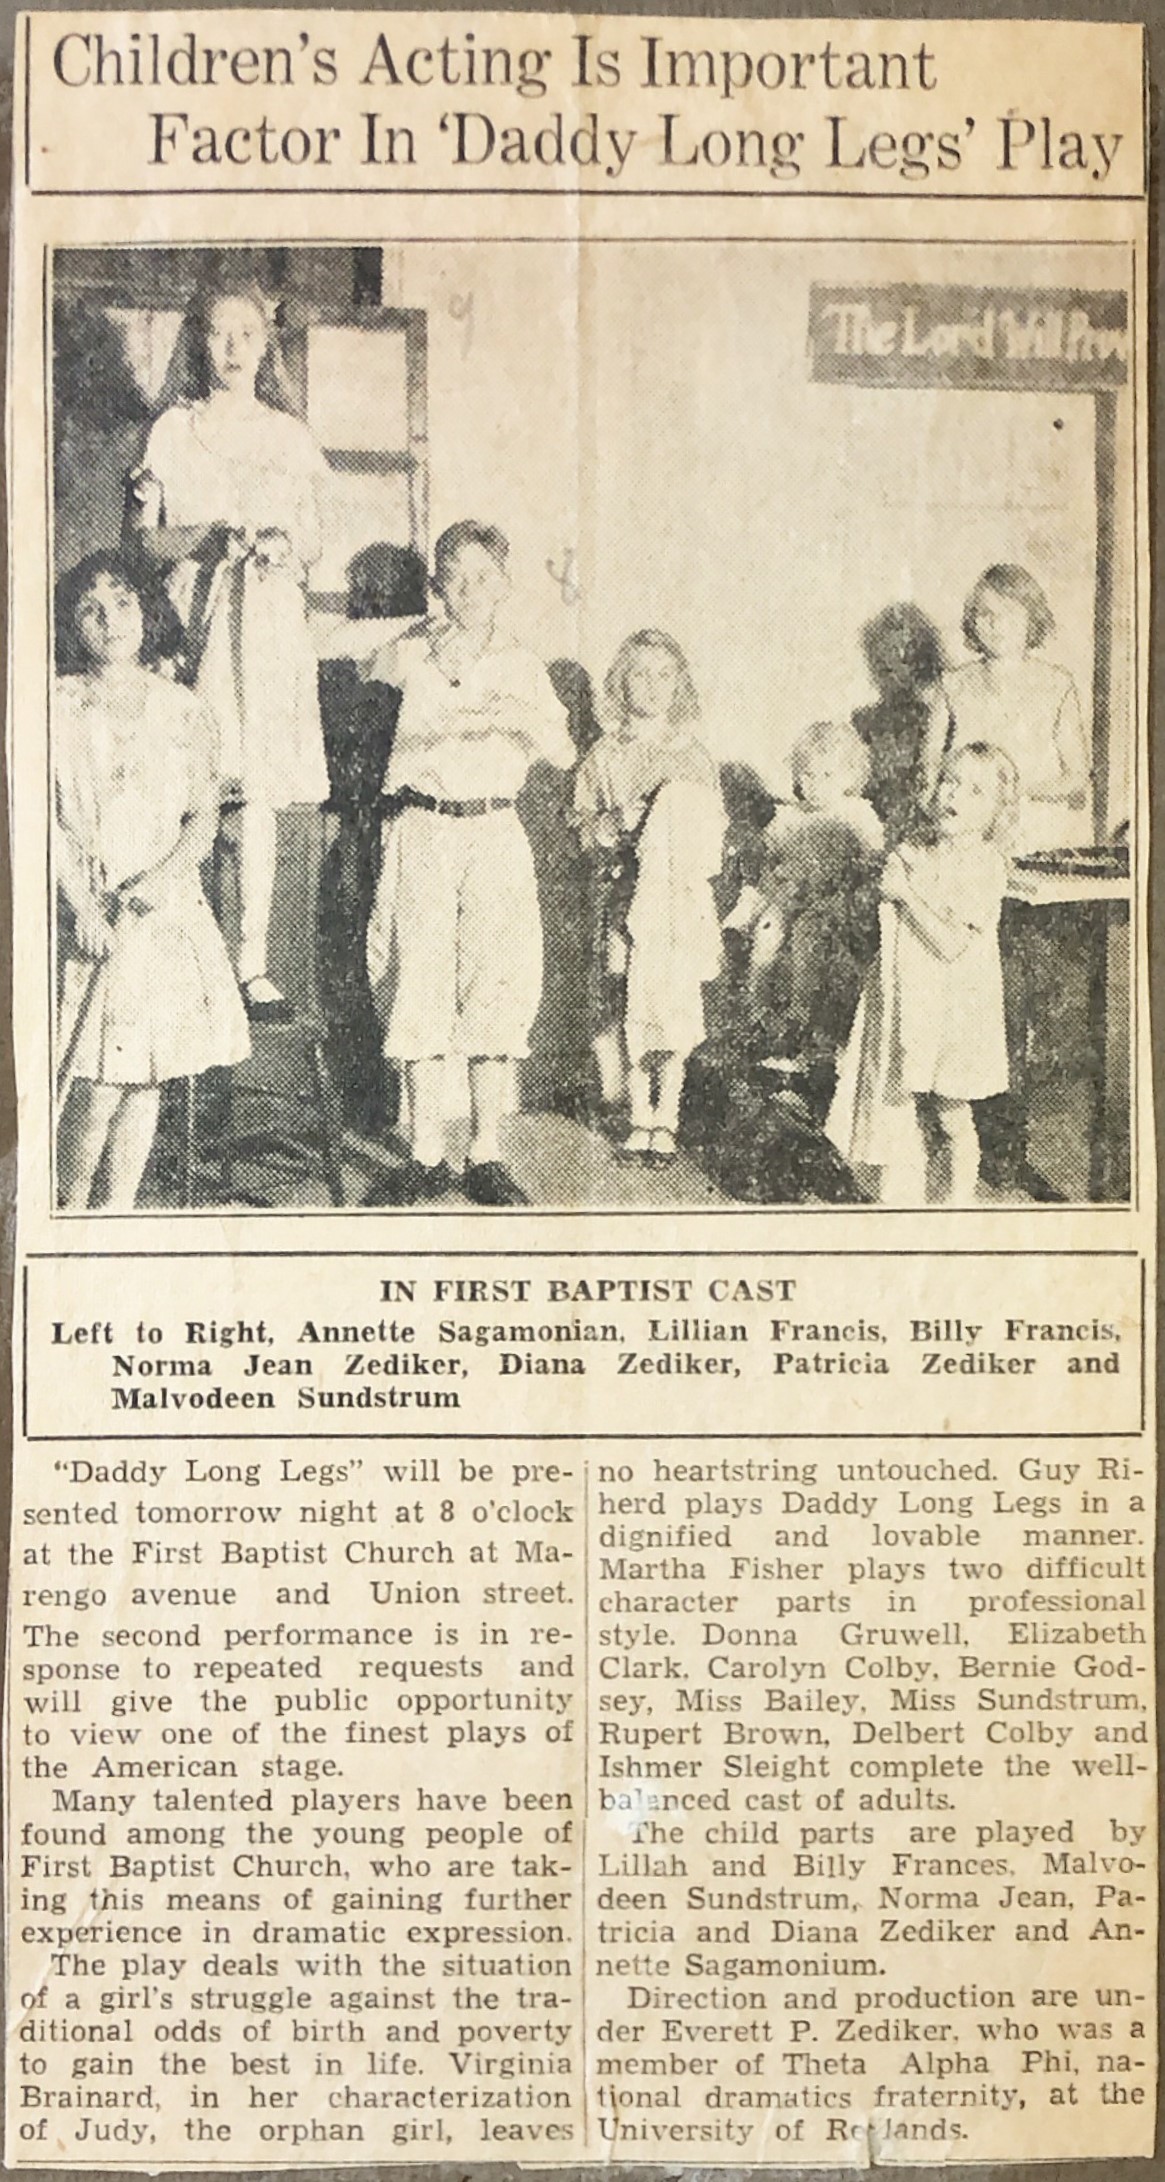  Bill was active as a Scout at Pasadena First Baptist Church — and appeared with Lillian in a production of “Daddy Long Legs,” c. early 1930s 